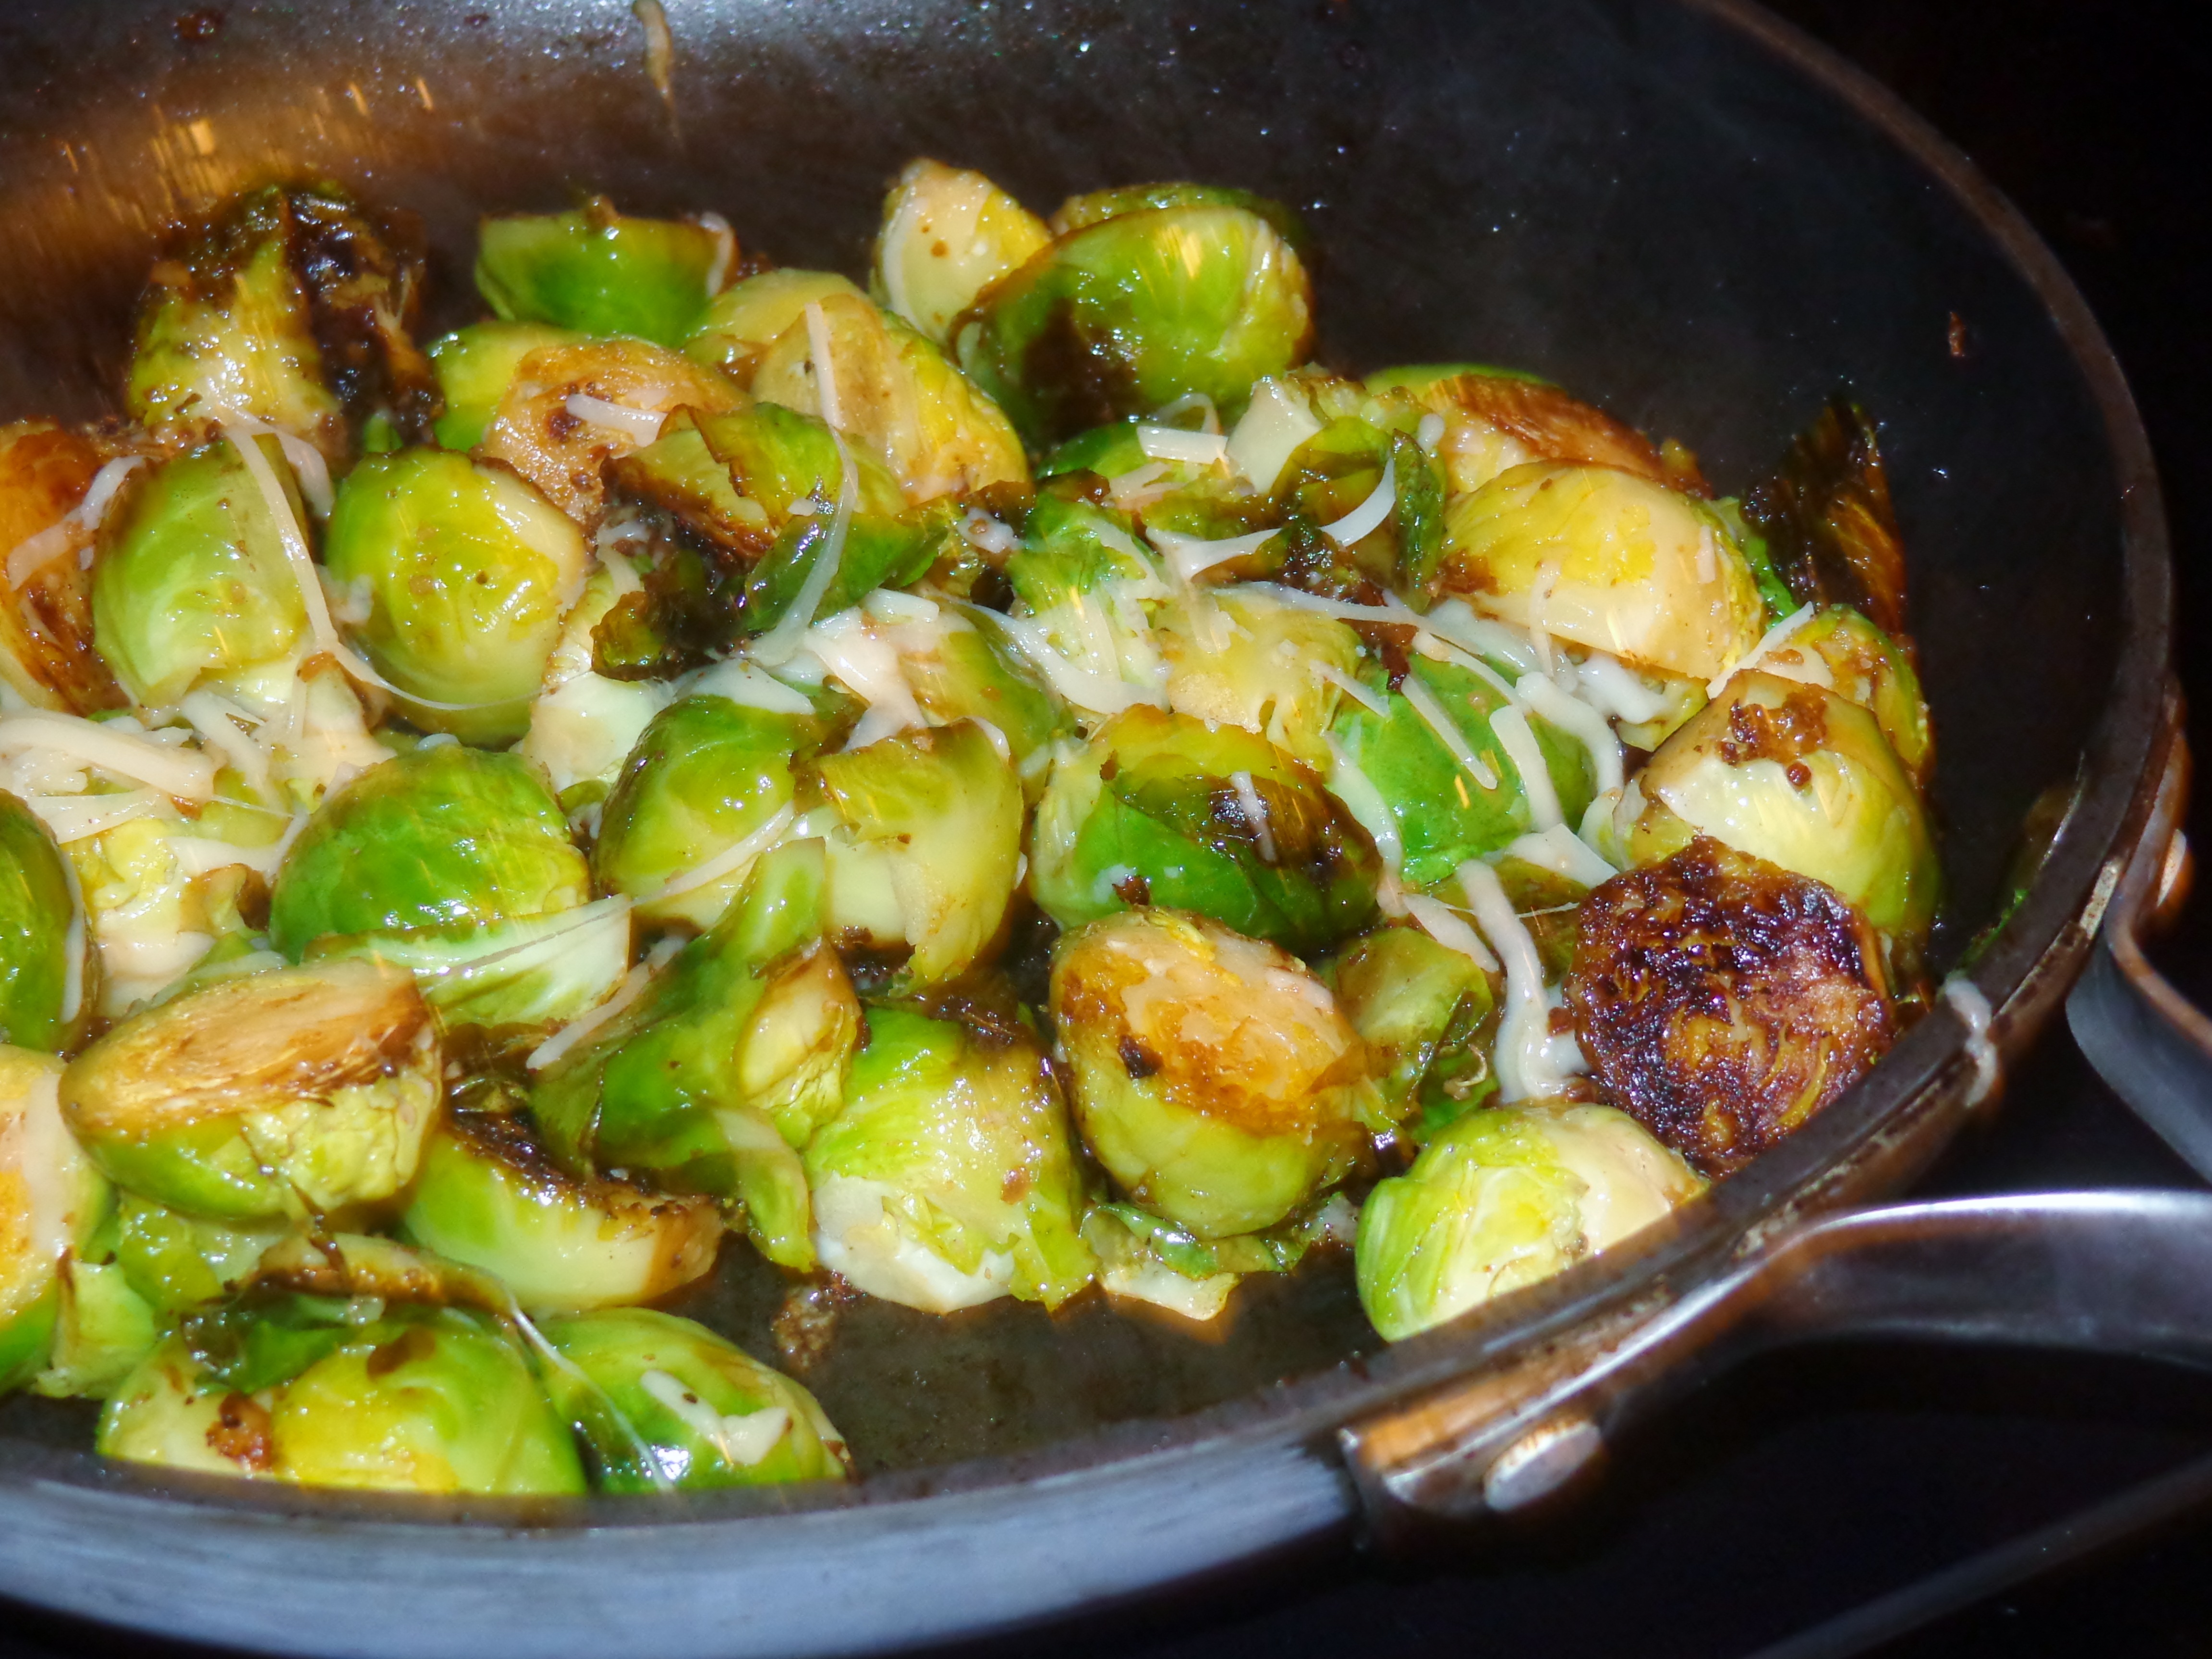 KITTENCAL'S ROASTED BRUSSELS/BRUSSELS SPROUTS